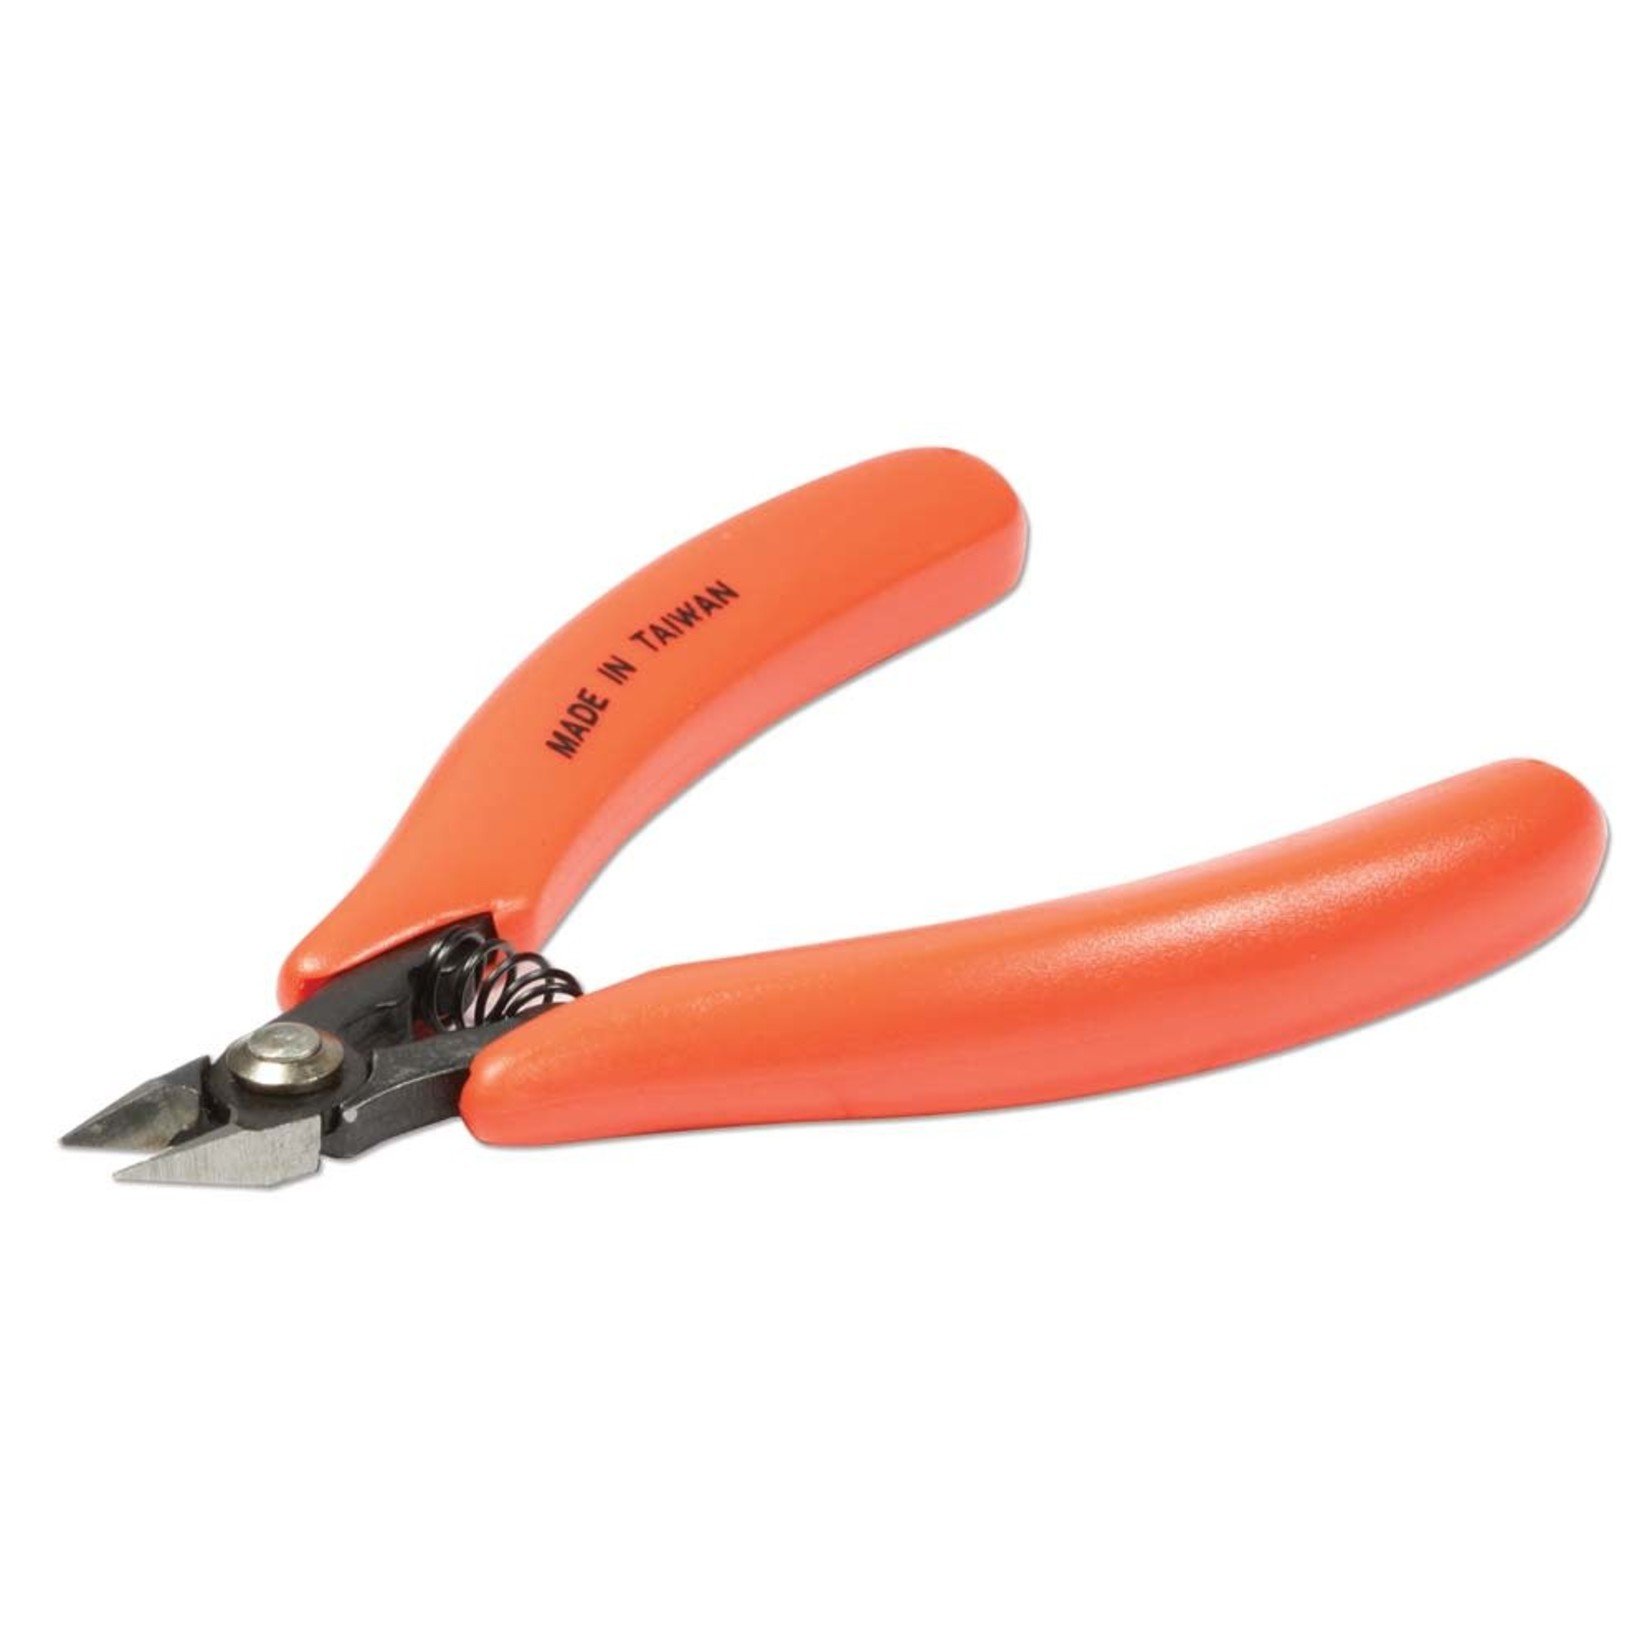 Flush Cutters with Orange Handle